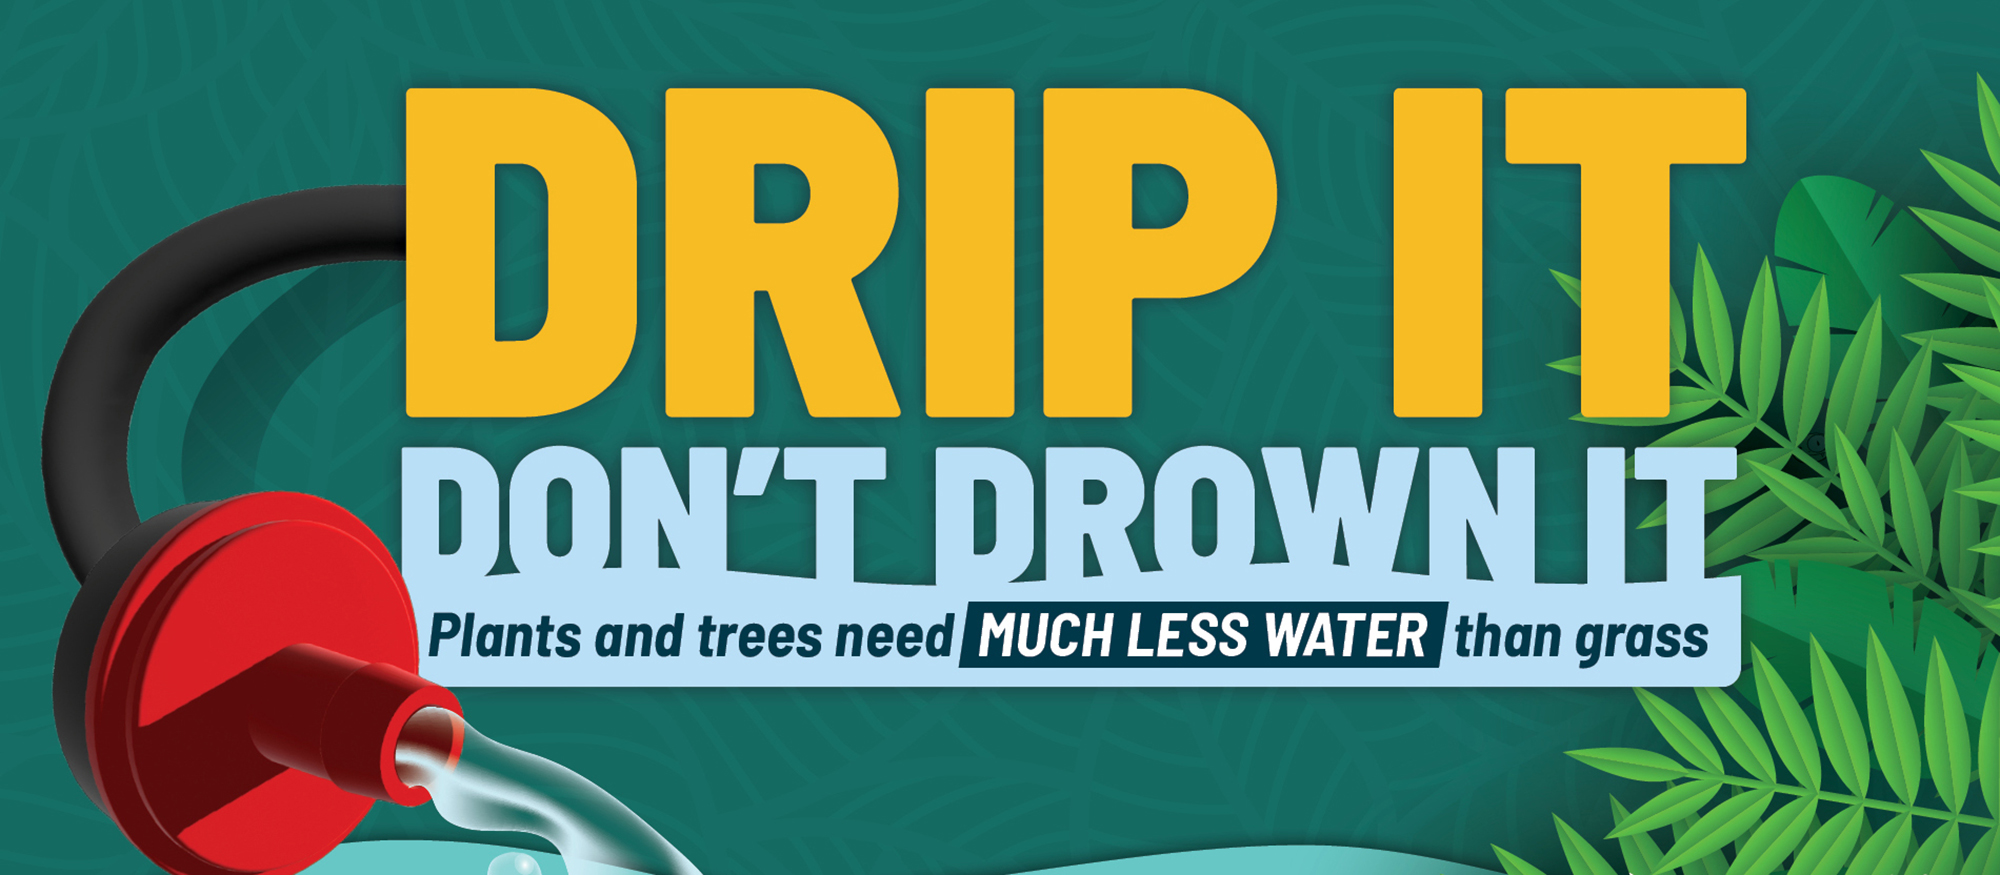 Graphic with drip head illustration says "Drip it don't drown it - plants need far less water than grass"